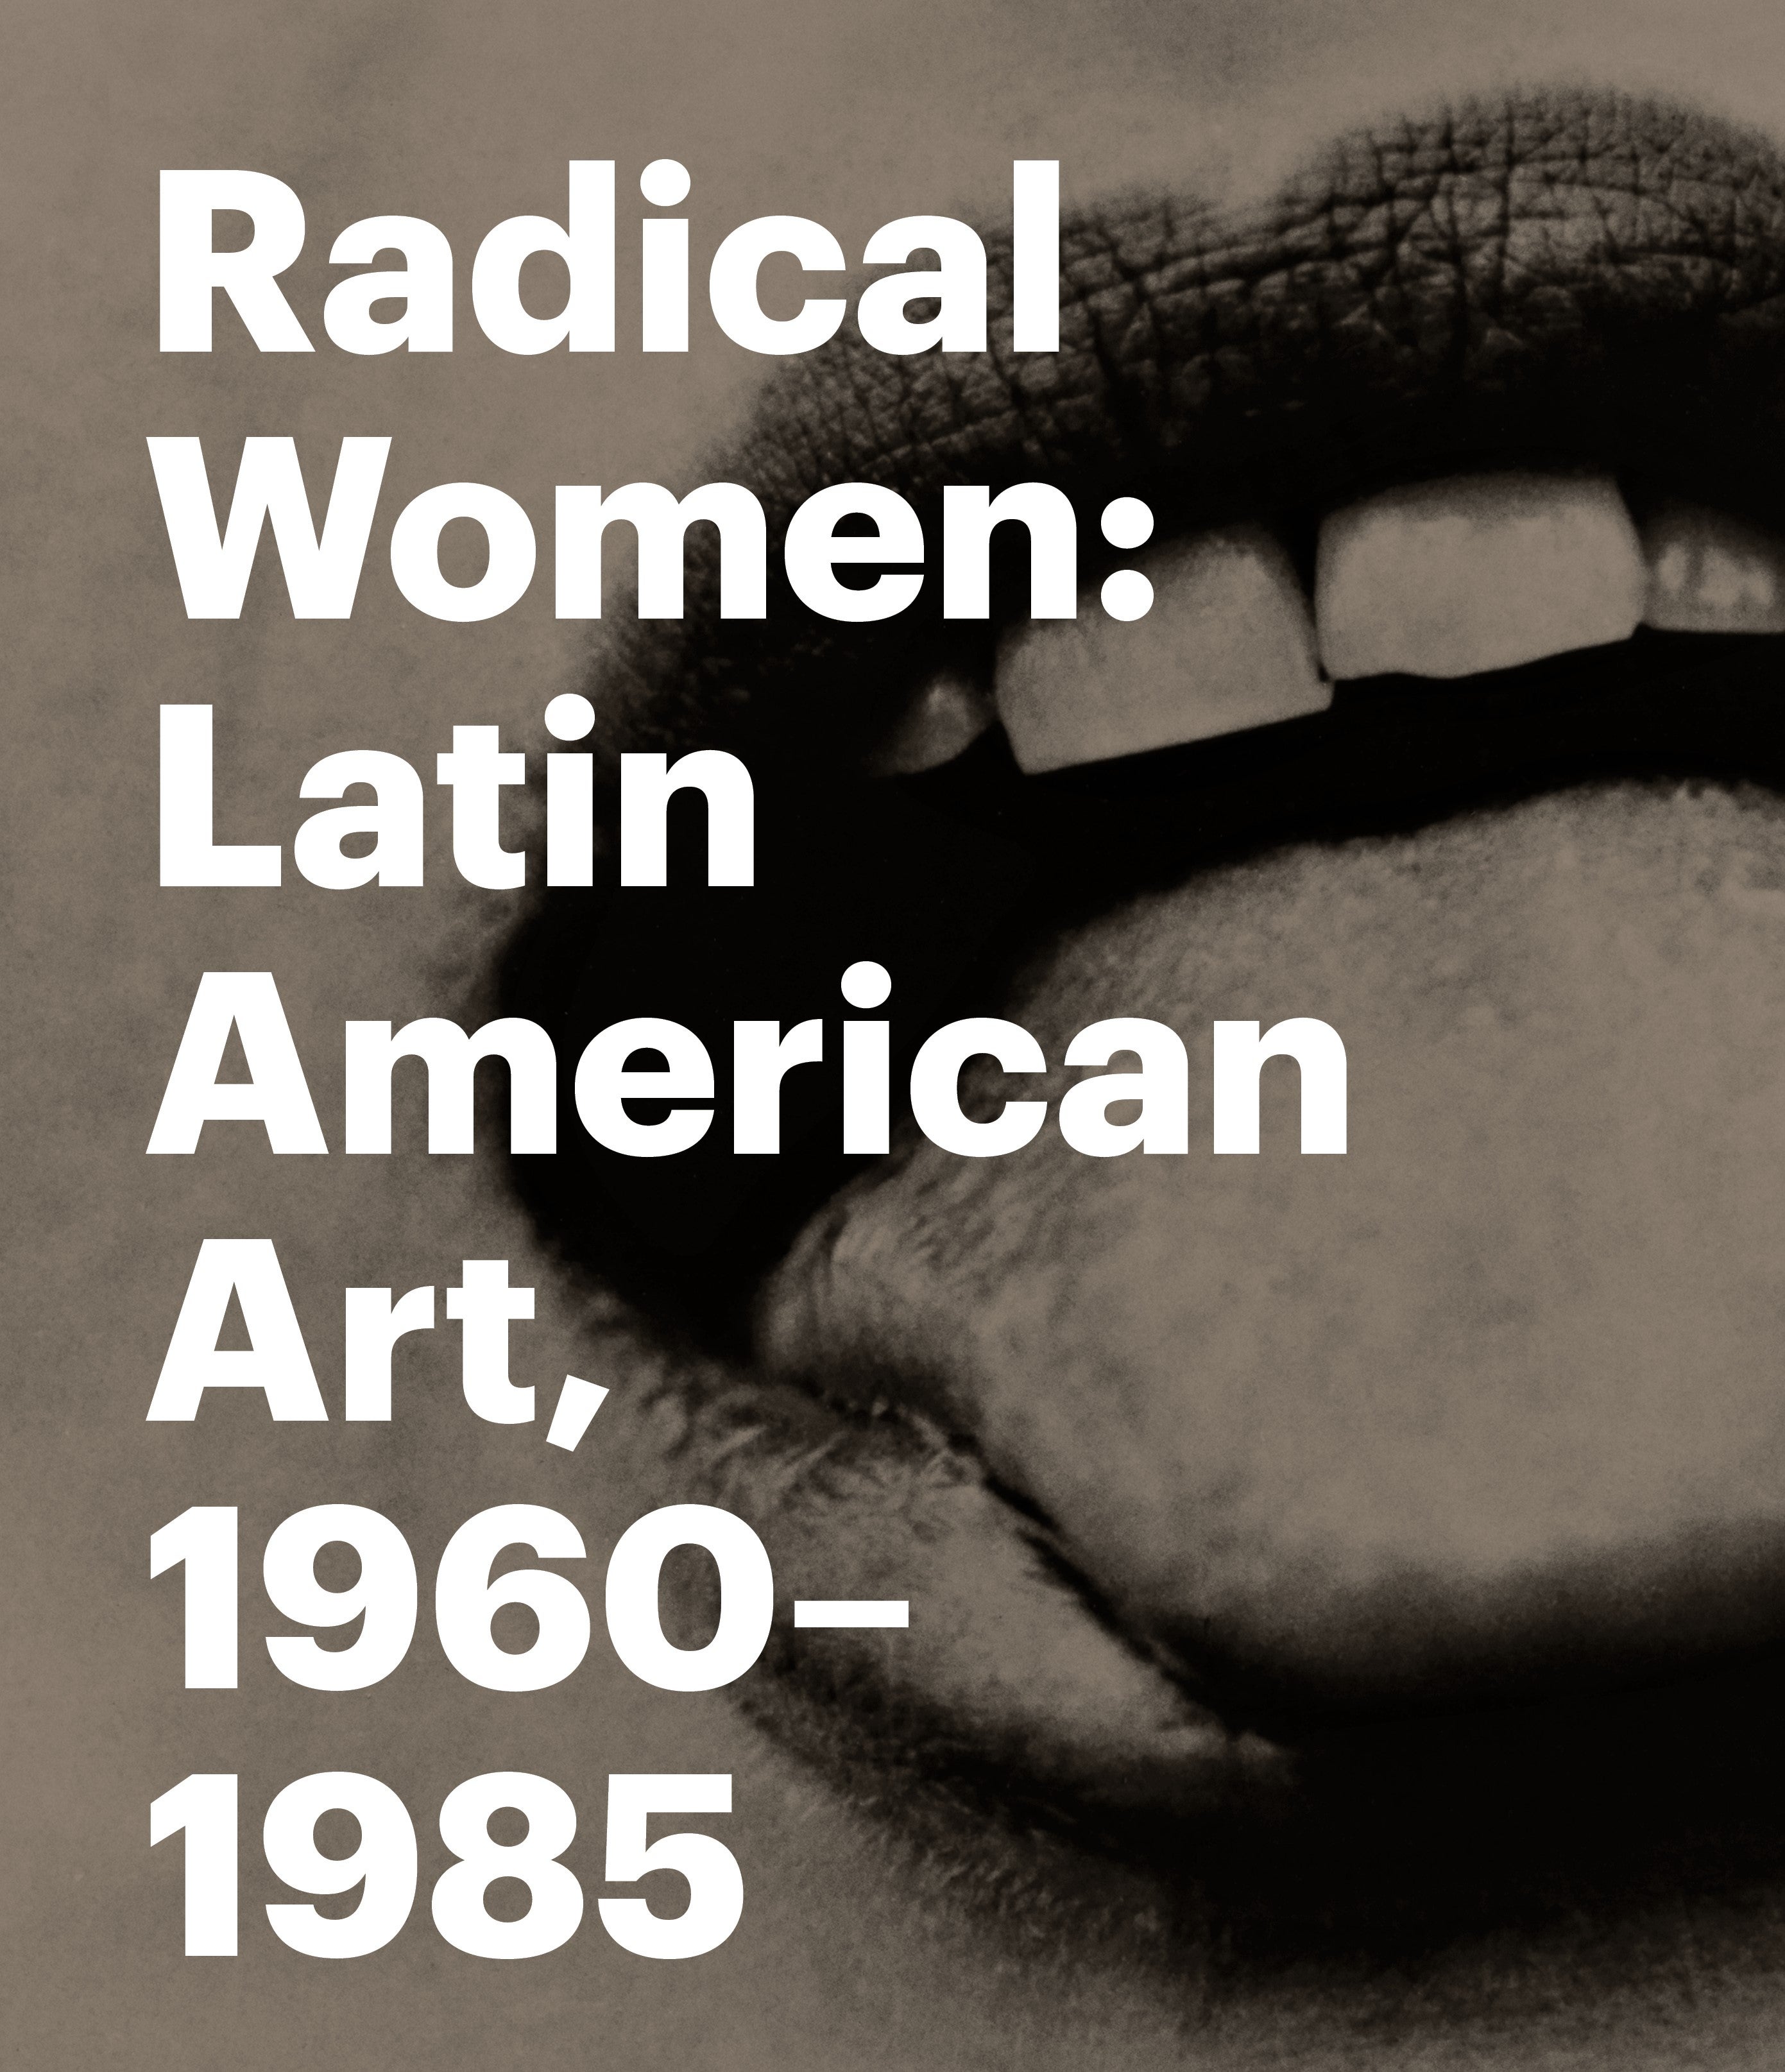 Radical Women: Latin American Art, 1960–1985 presents the work of 120 women artists and collectives active in Latin America and the United States during a key period in Latin American history and the development of contemporary art.